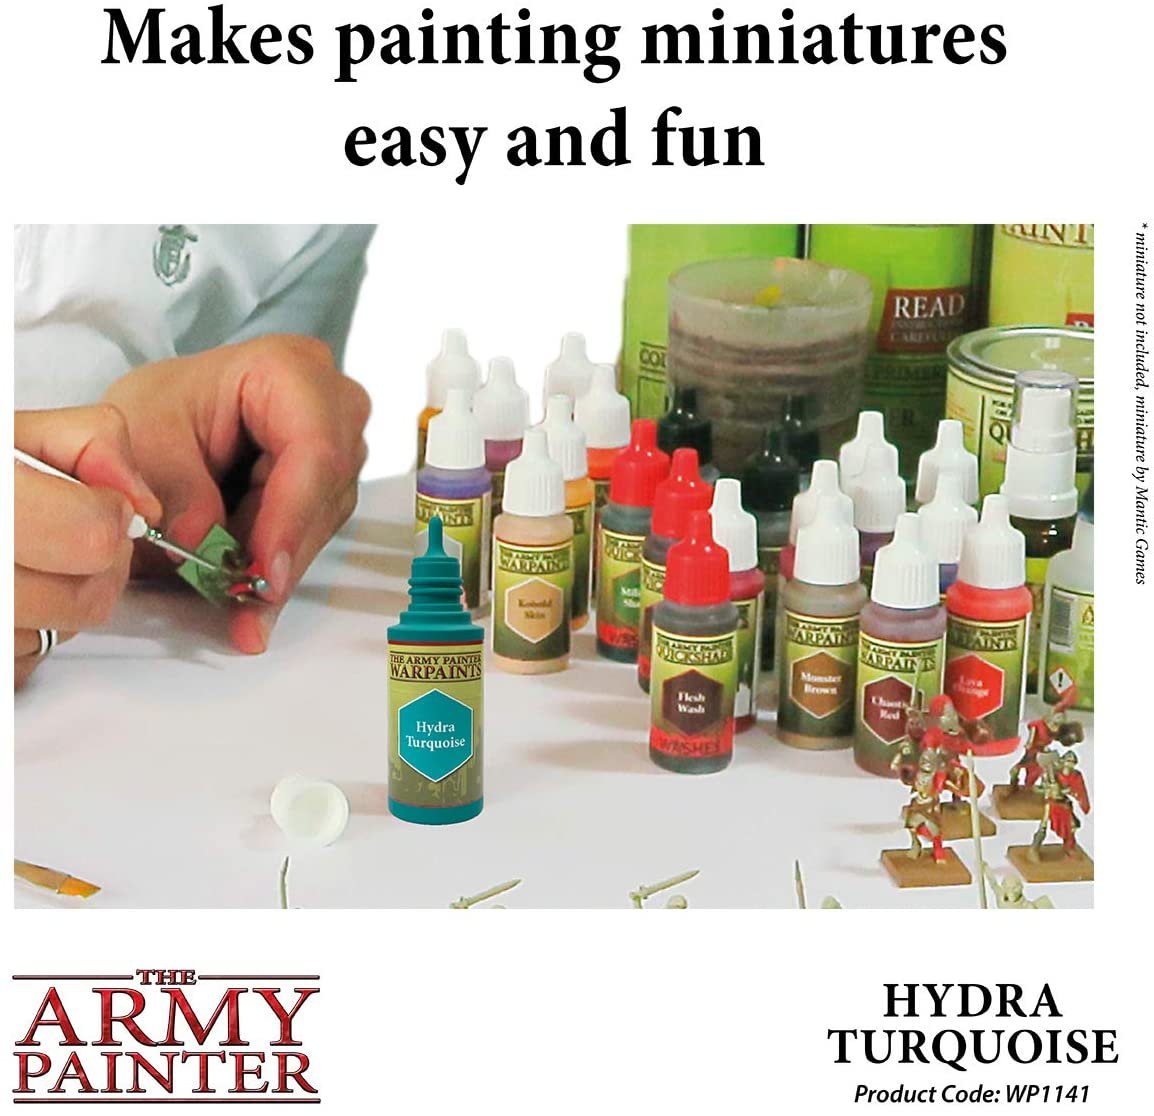 The Army Painter - Warpaints: Hydra Turquoise (18ml/0.6oz)